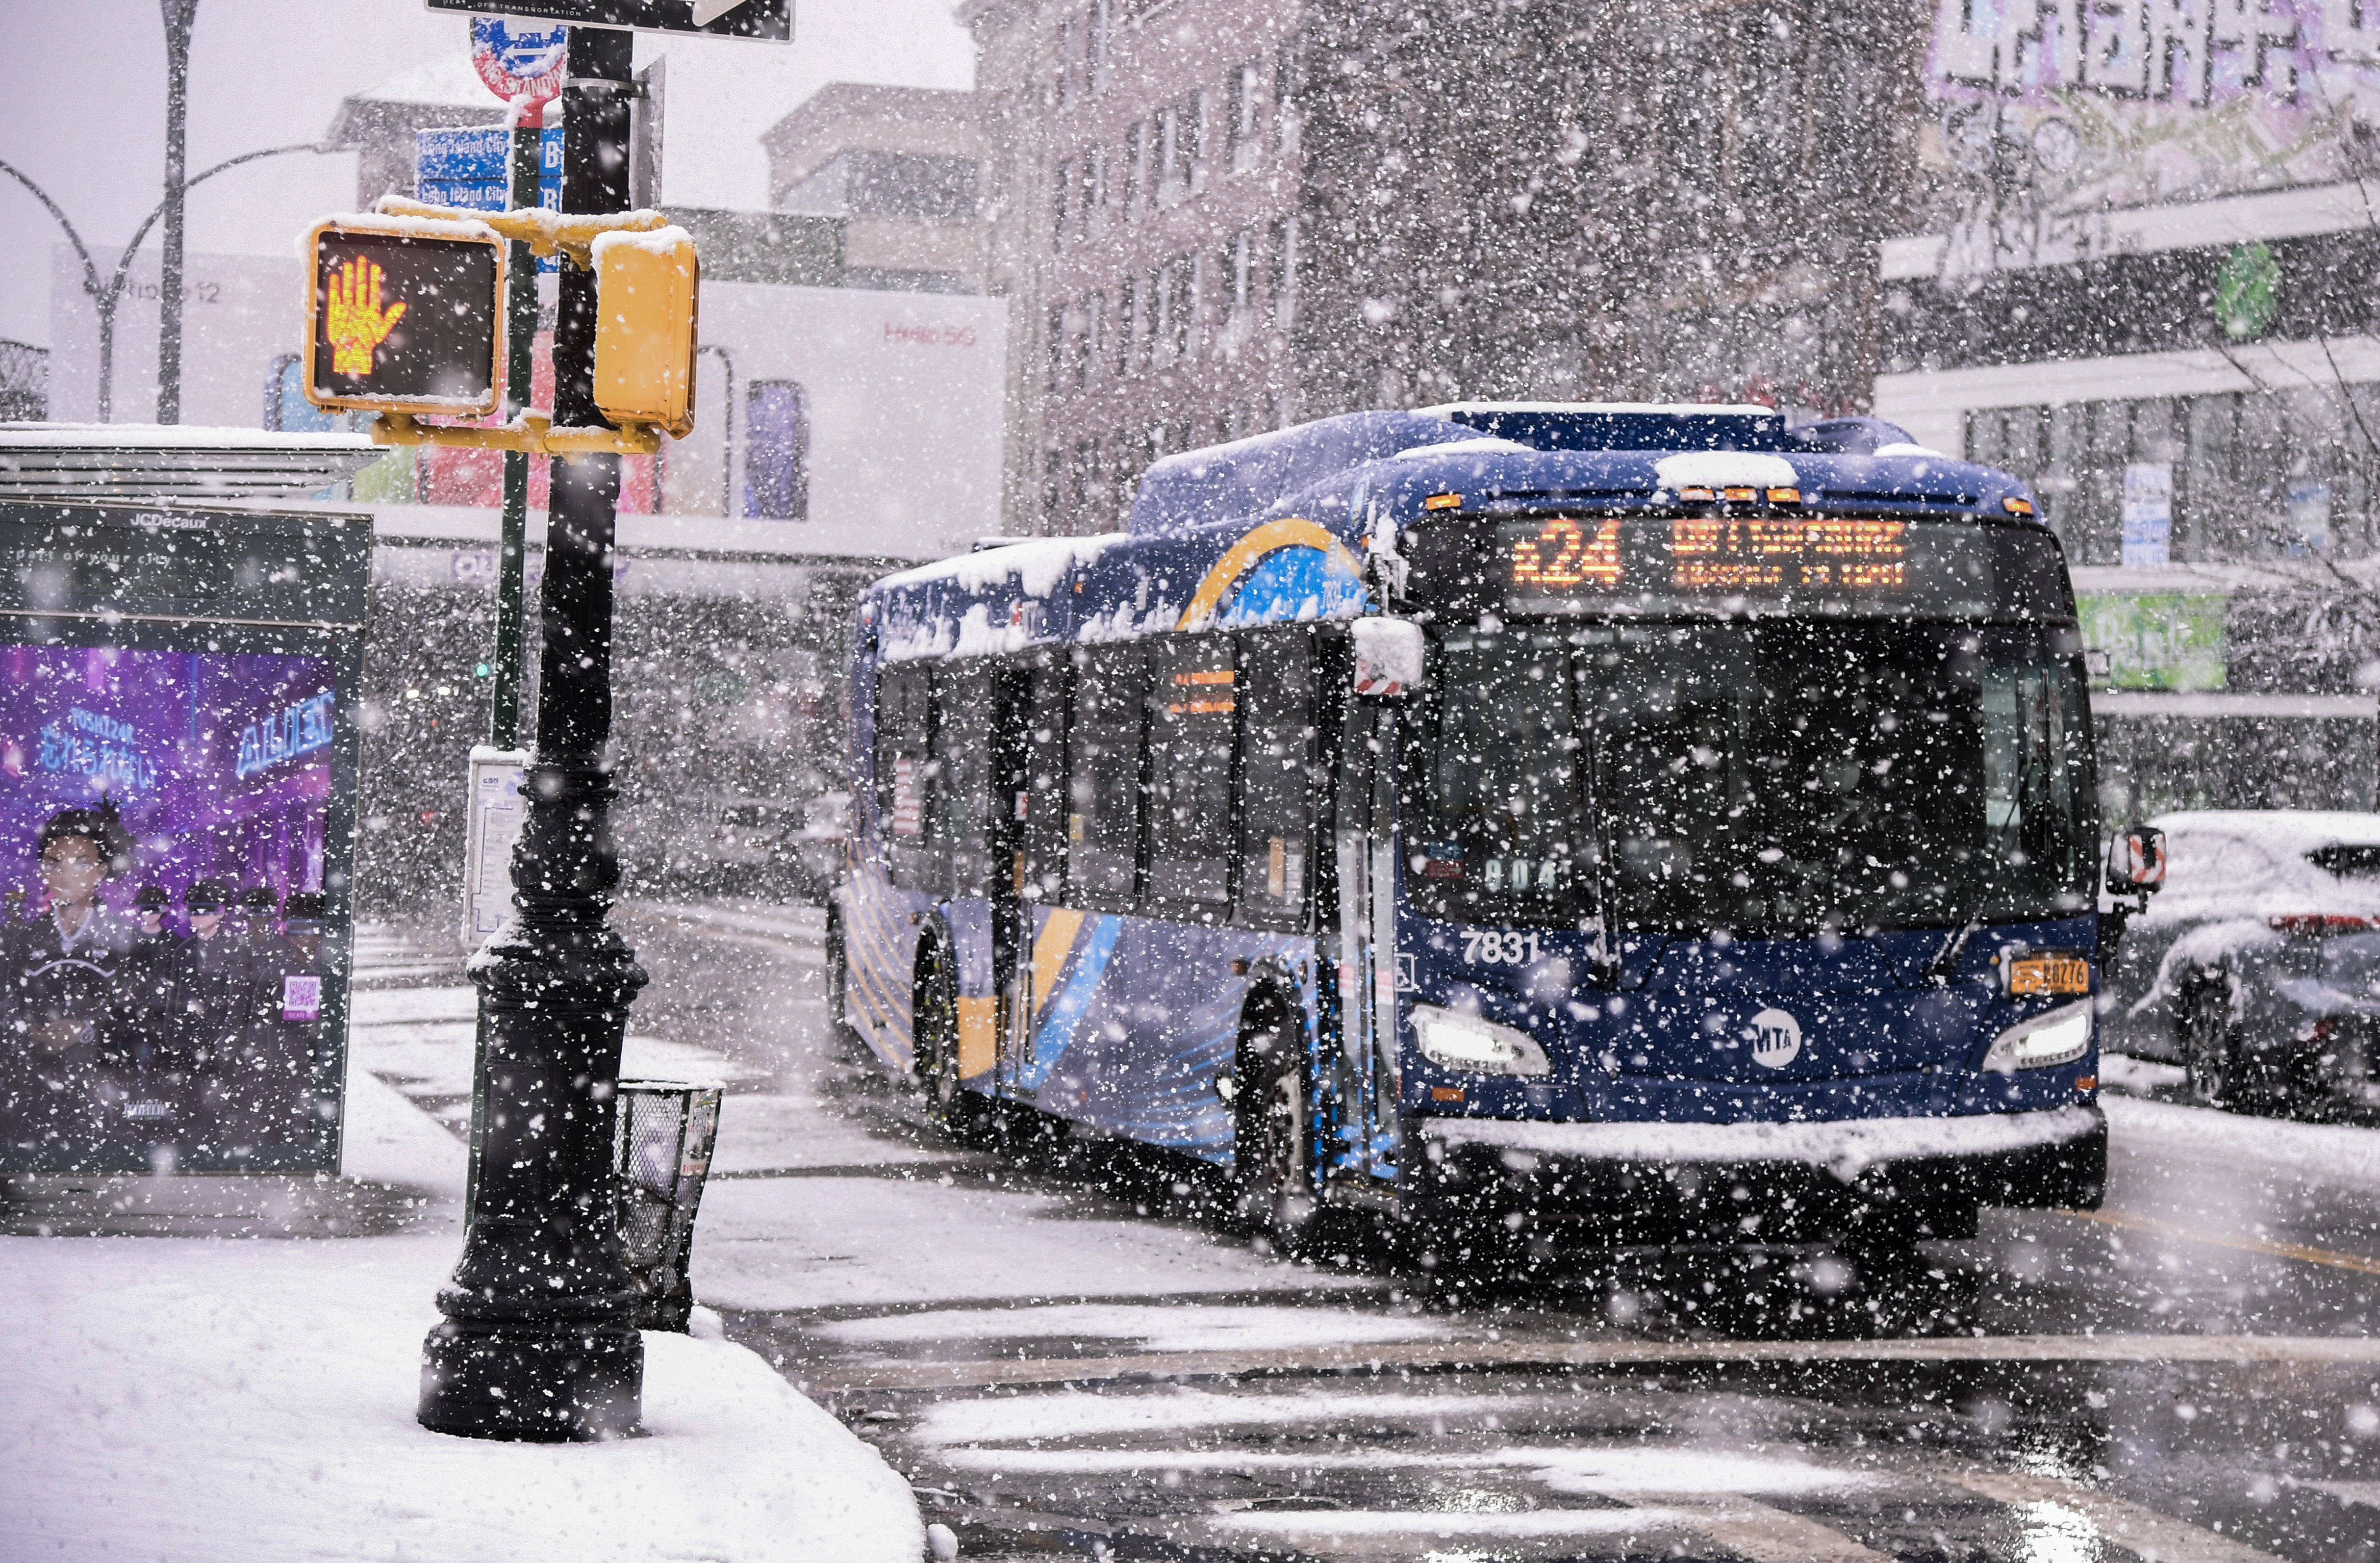 Bus in snow